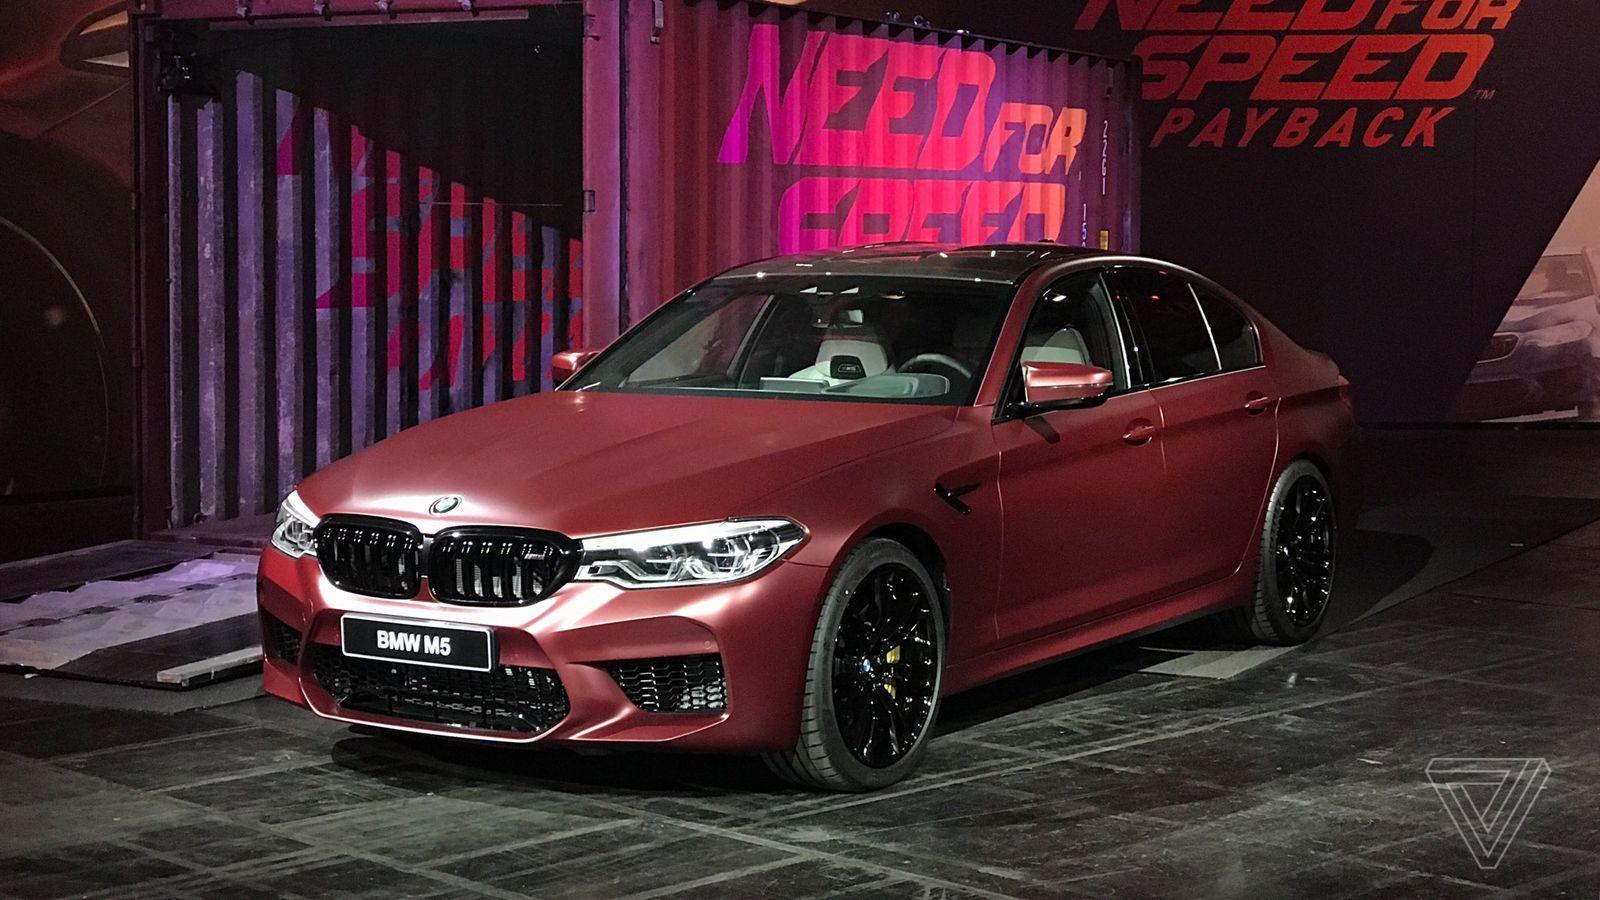 BMW shows off the new M5 in Need for Speed Payback